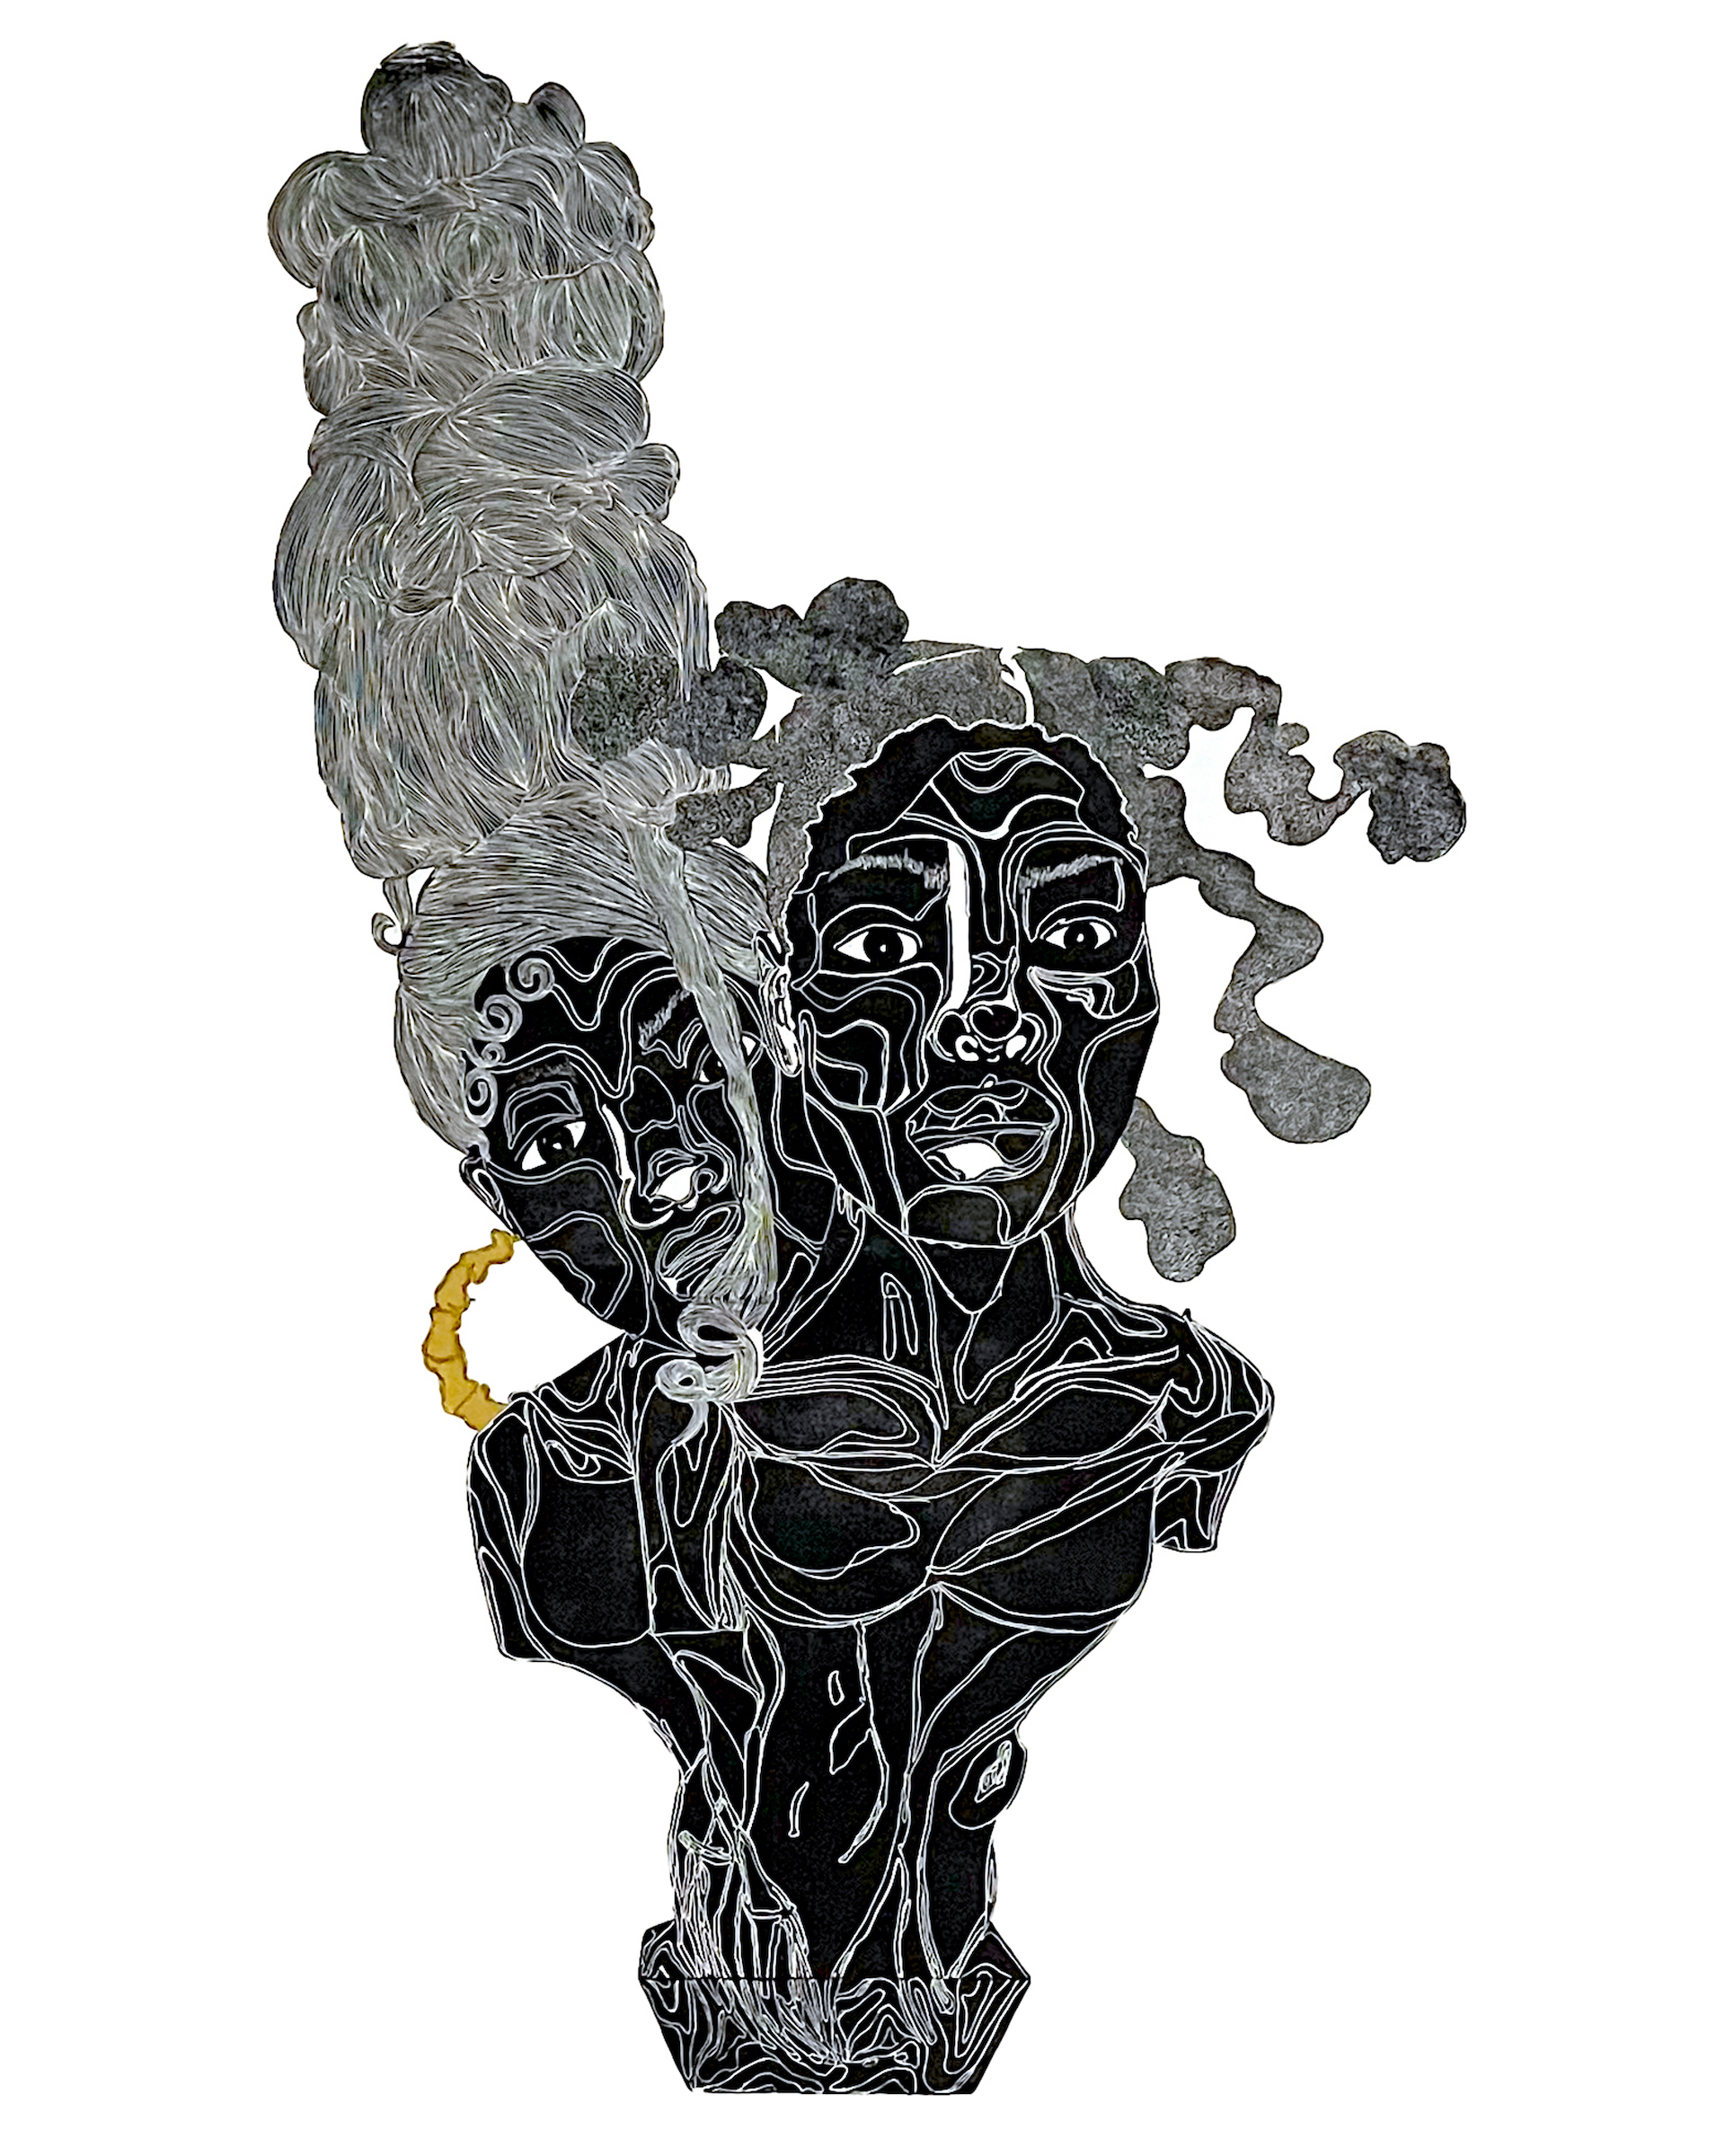 ‘shun and ‘ya: Thick like Thaddeus, Black like Marquina Linocut, relief ink, hand painting, hand embroidery on 280 gsm BFK Rives; 64" x 42"; 2022 Variable Edition of 2 Two busts meld together into a single pedestal.